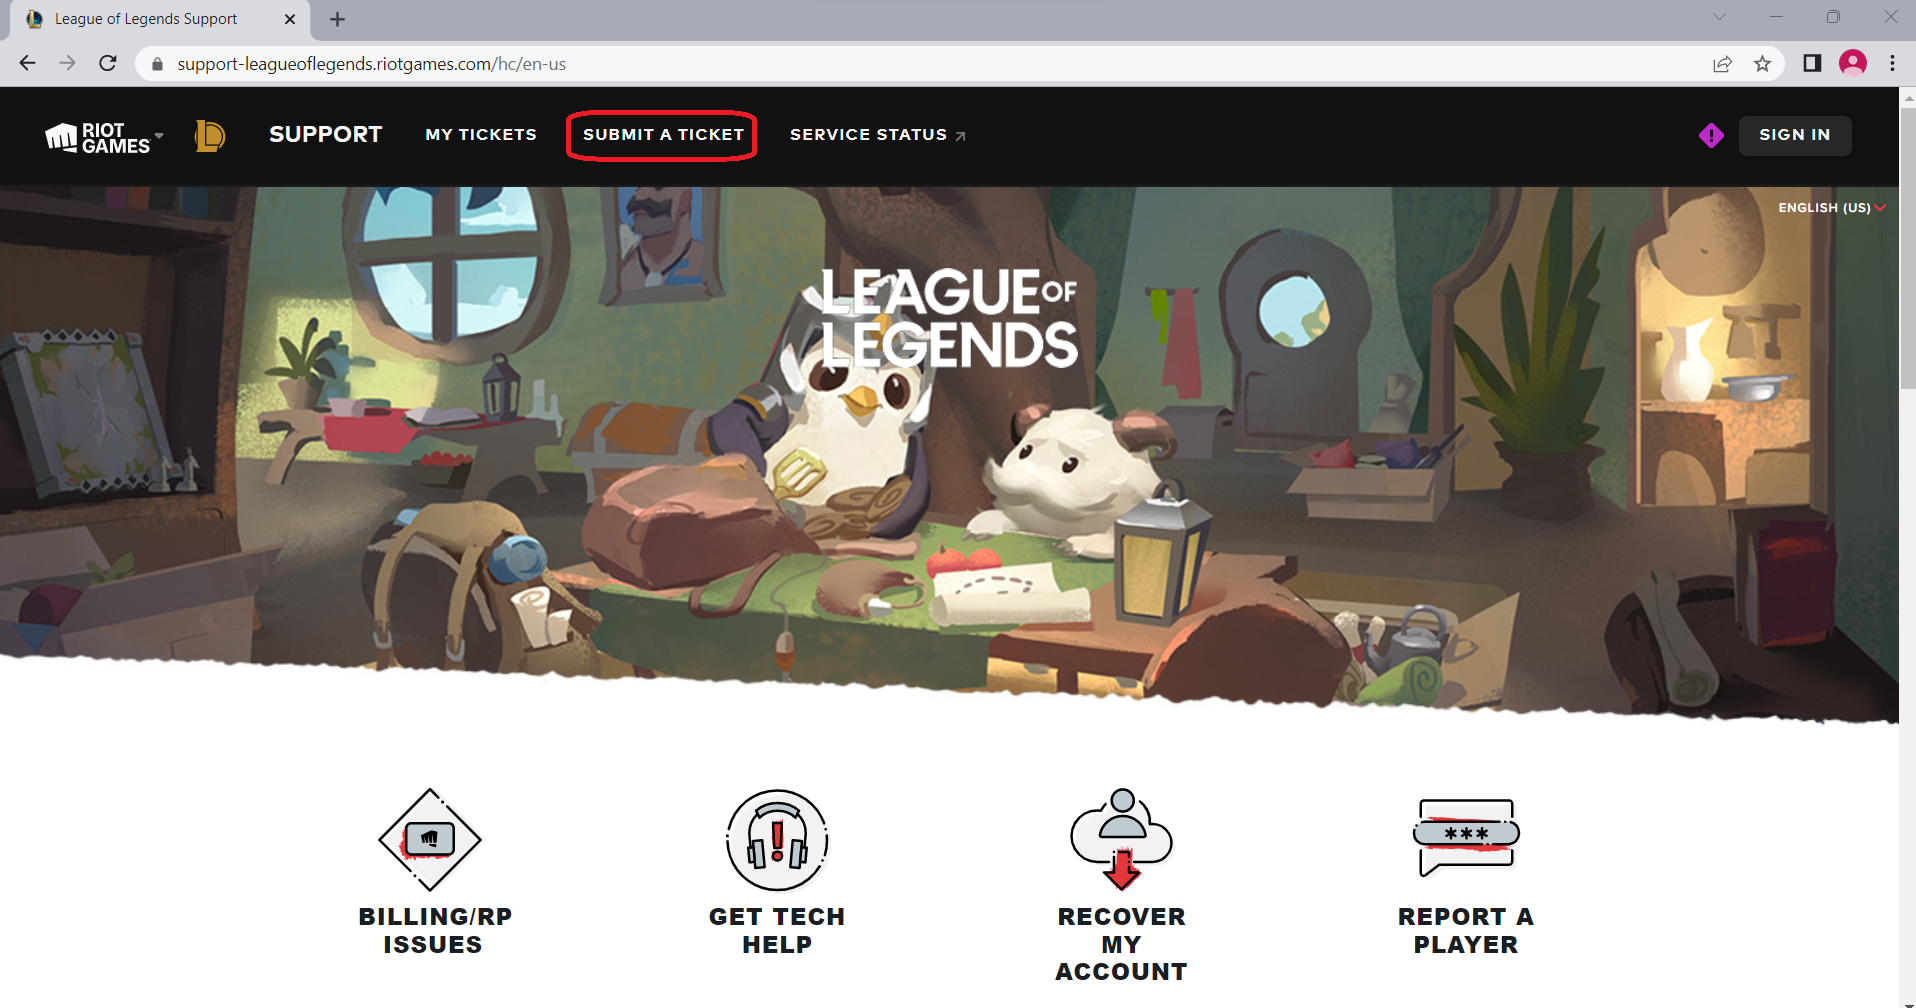 Player Reporting Guide and FAQ – League of Legends Support